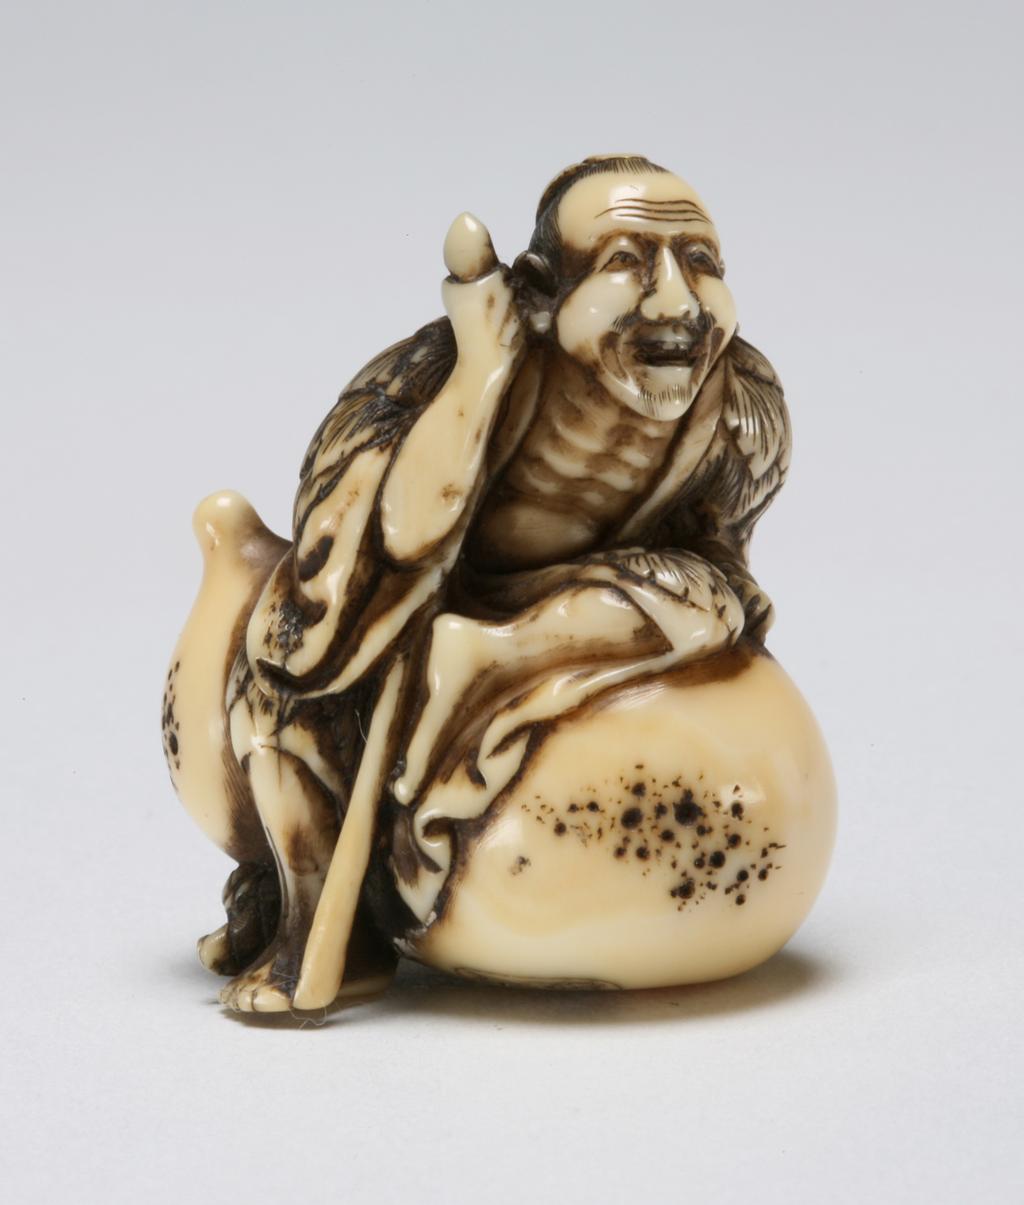 An image of Netsuke: katabori: Sennin Tekkai. Chogetsu, Edo Period (1603-1868). Figure of Sennin Tekkai as an old beggar holding a staff in his right hand, barefoot and wearing a cloak made of leaves revealing his ribs, blowing his spirit into space through his open mouth. He is seated on a gourd. The details are finely carved and incised. Himotoshi on the underside. Ivory, carved, incised and stained, height, whole, 4.0 cm, width, whole, 3.5 cm, circa 1800-1868. Edo Period (1615-1868).